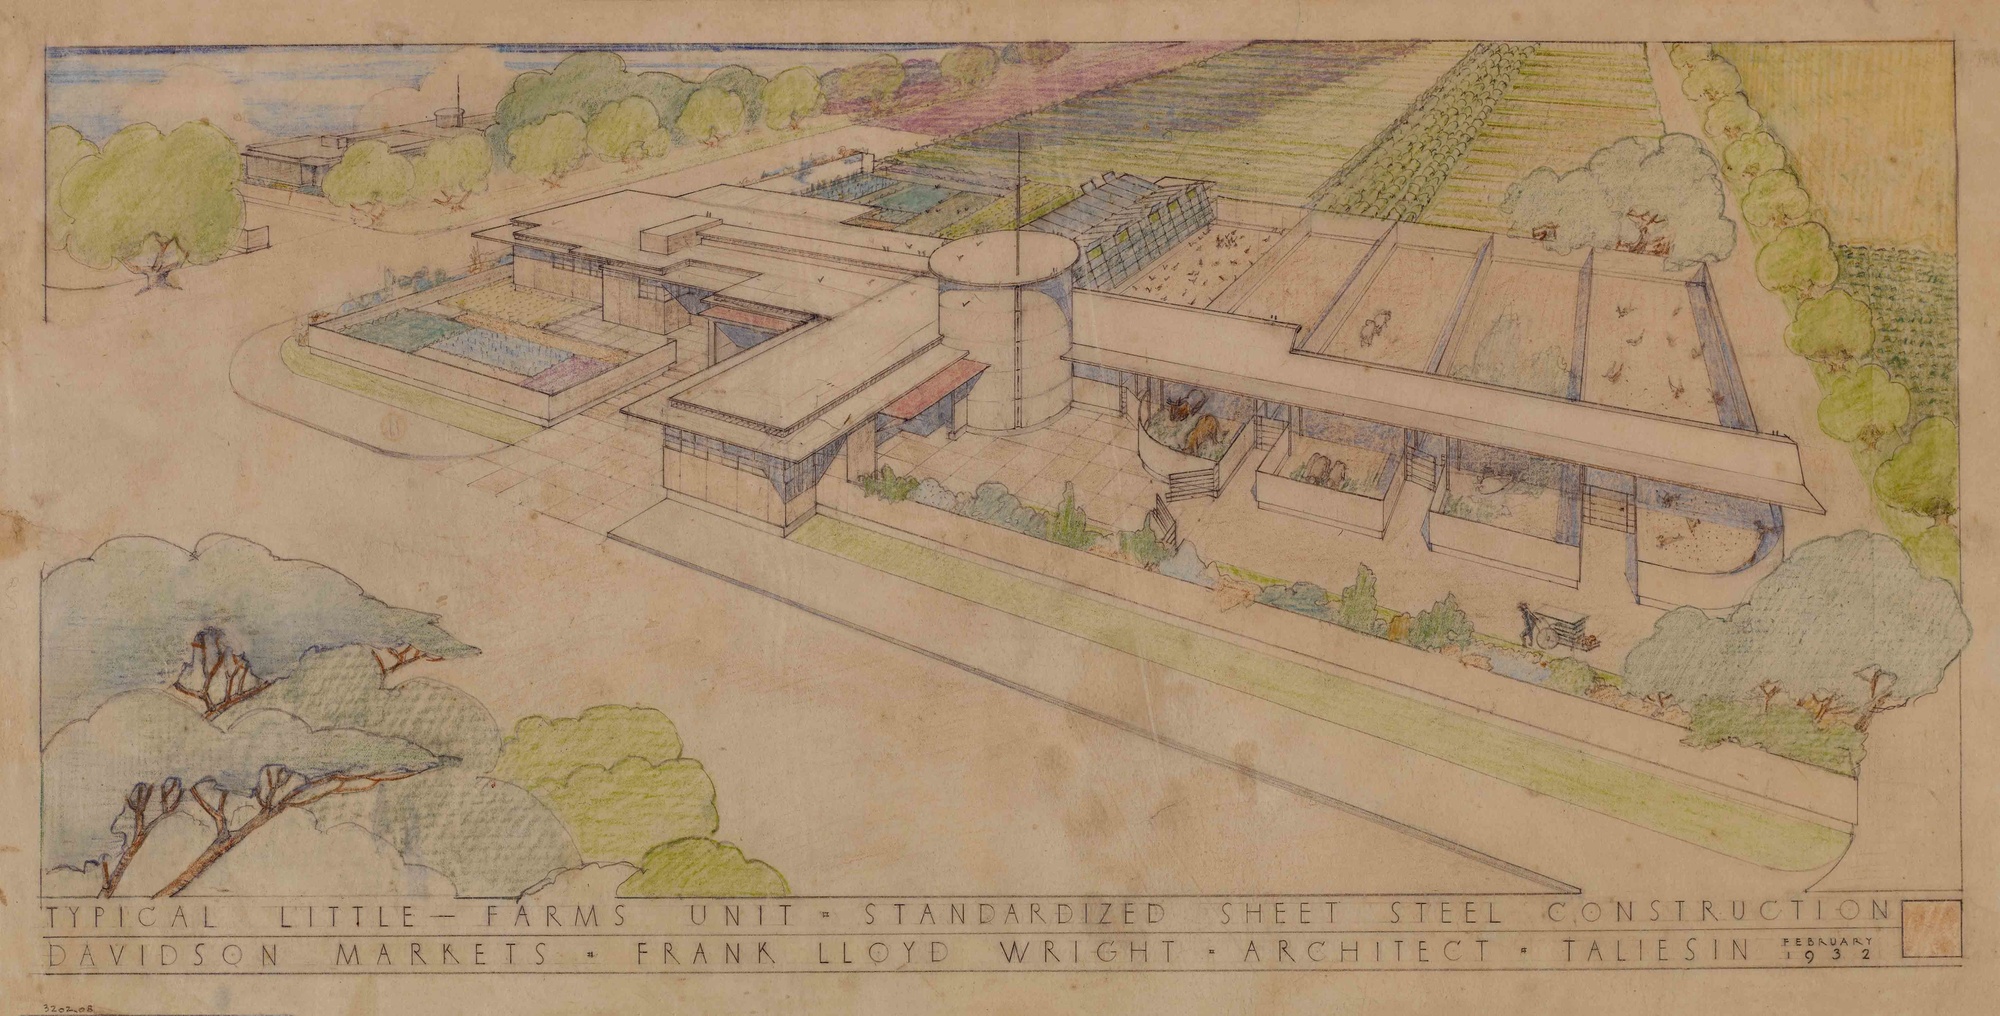 A 1932 illustration of Davidson Little Farms Unit by Frank Lloyd Wright. Image courtesy of MoMA